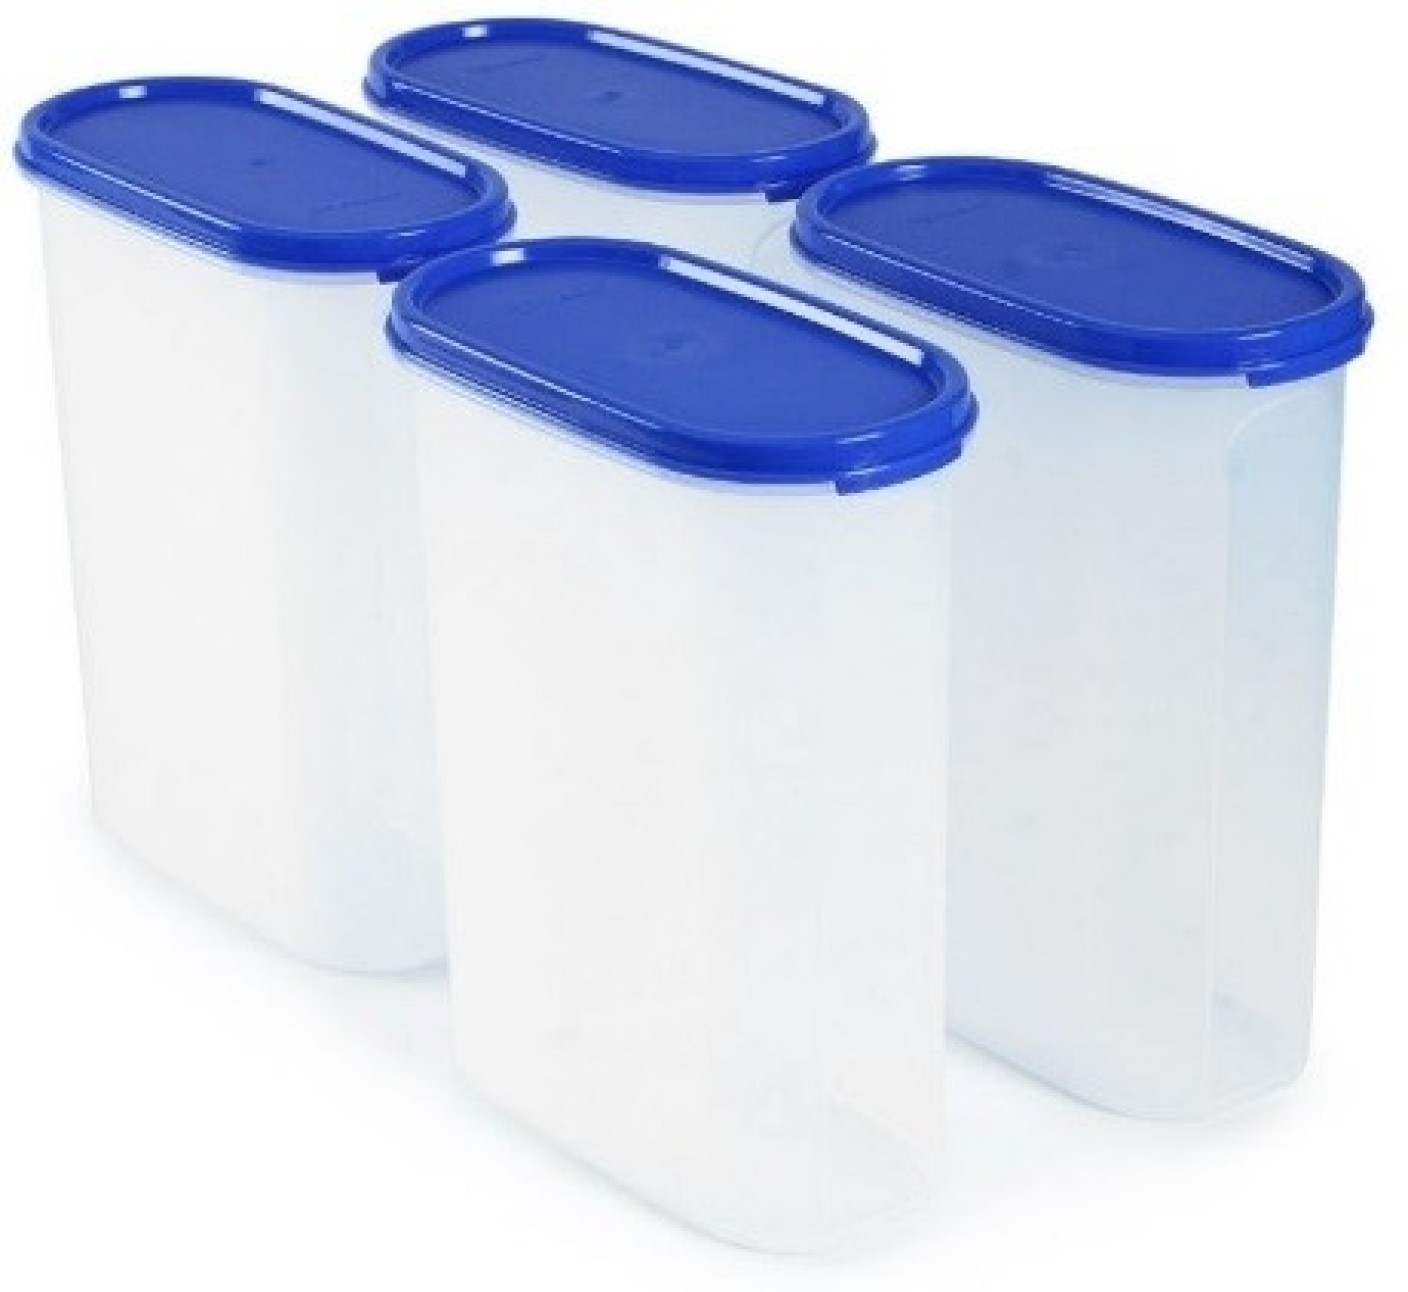  Tupperware  MM Oval Set  of 4 2300 ml Plastic Grocery 